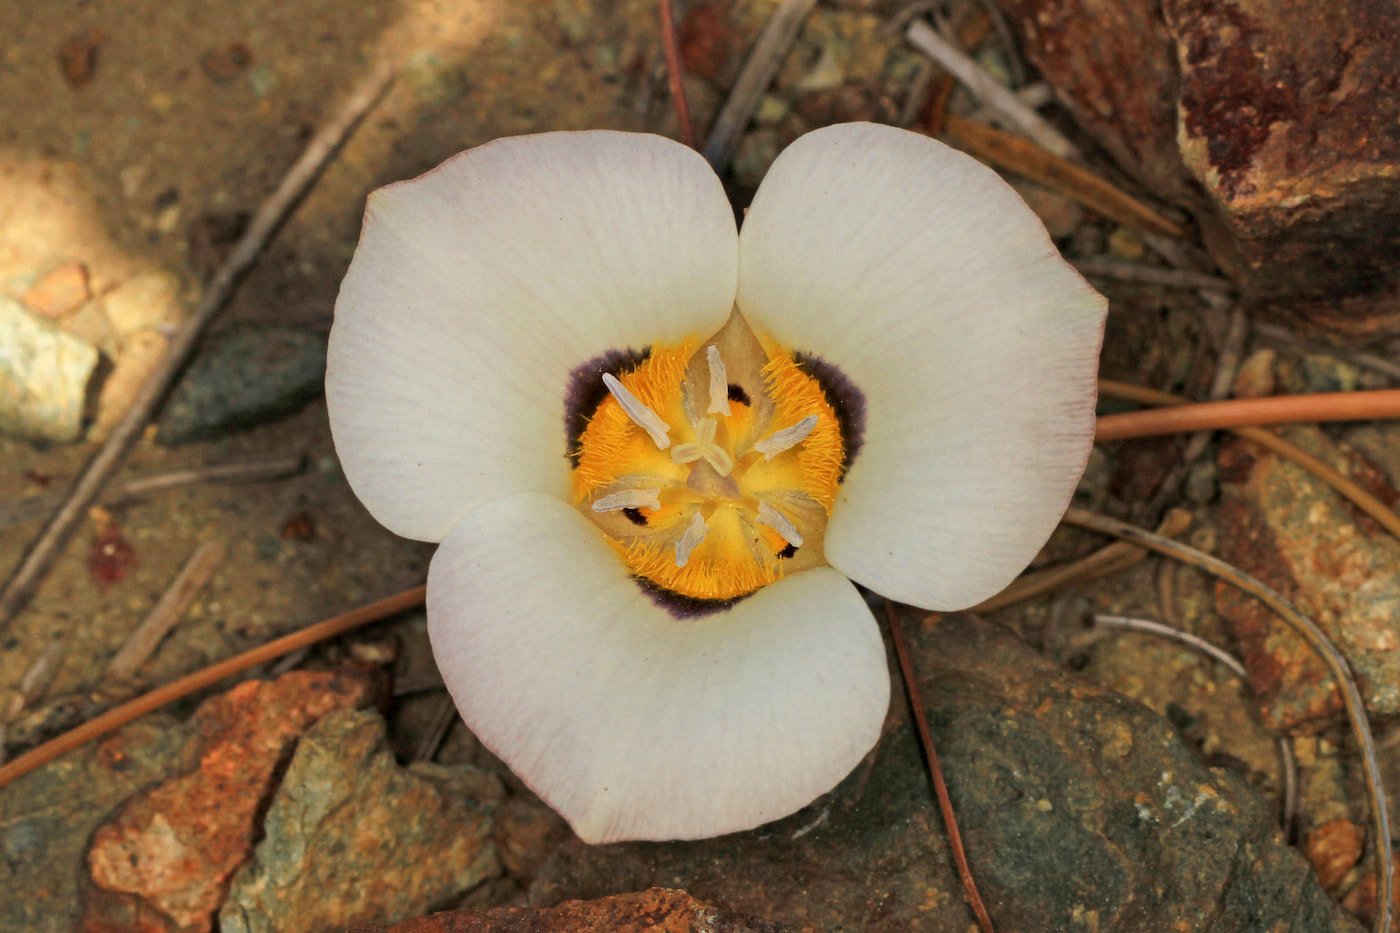 Mariposa Lily is a wildflower found in redwood forests. Photo by Judy Gallagher